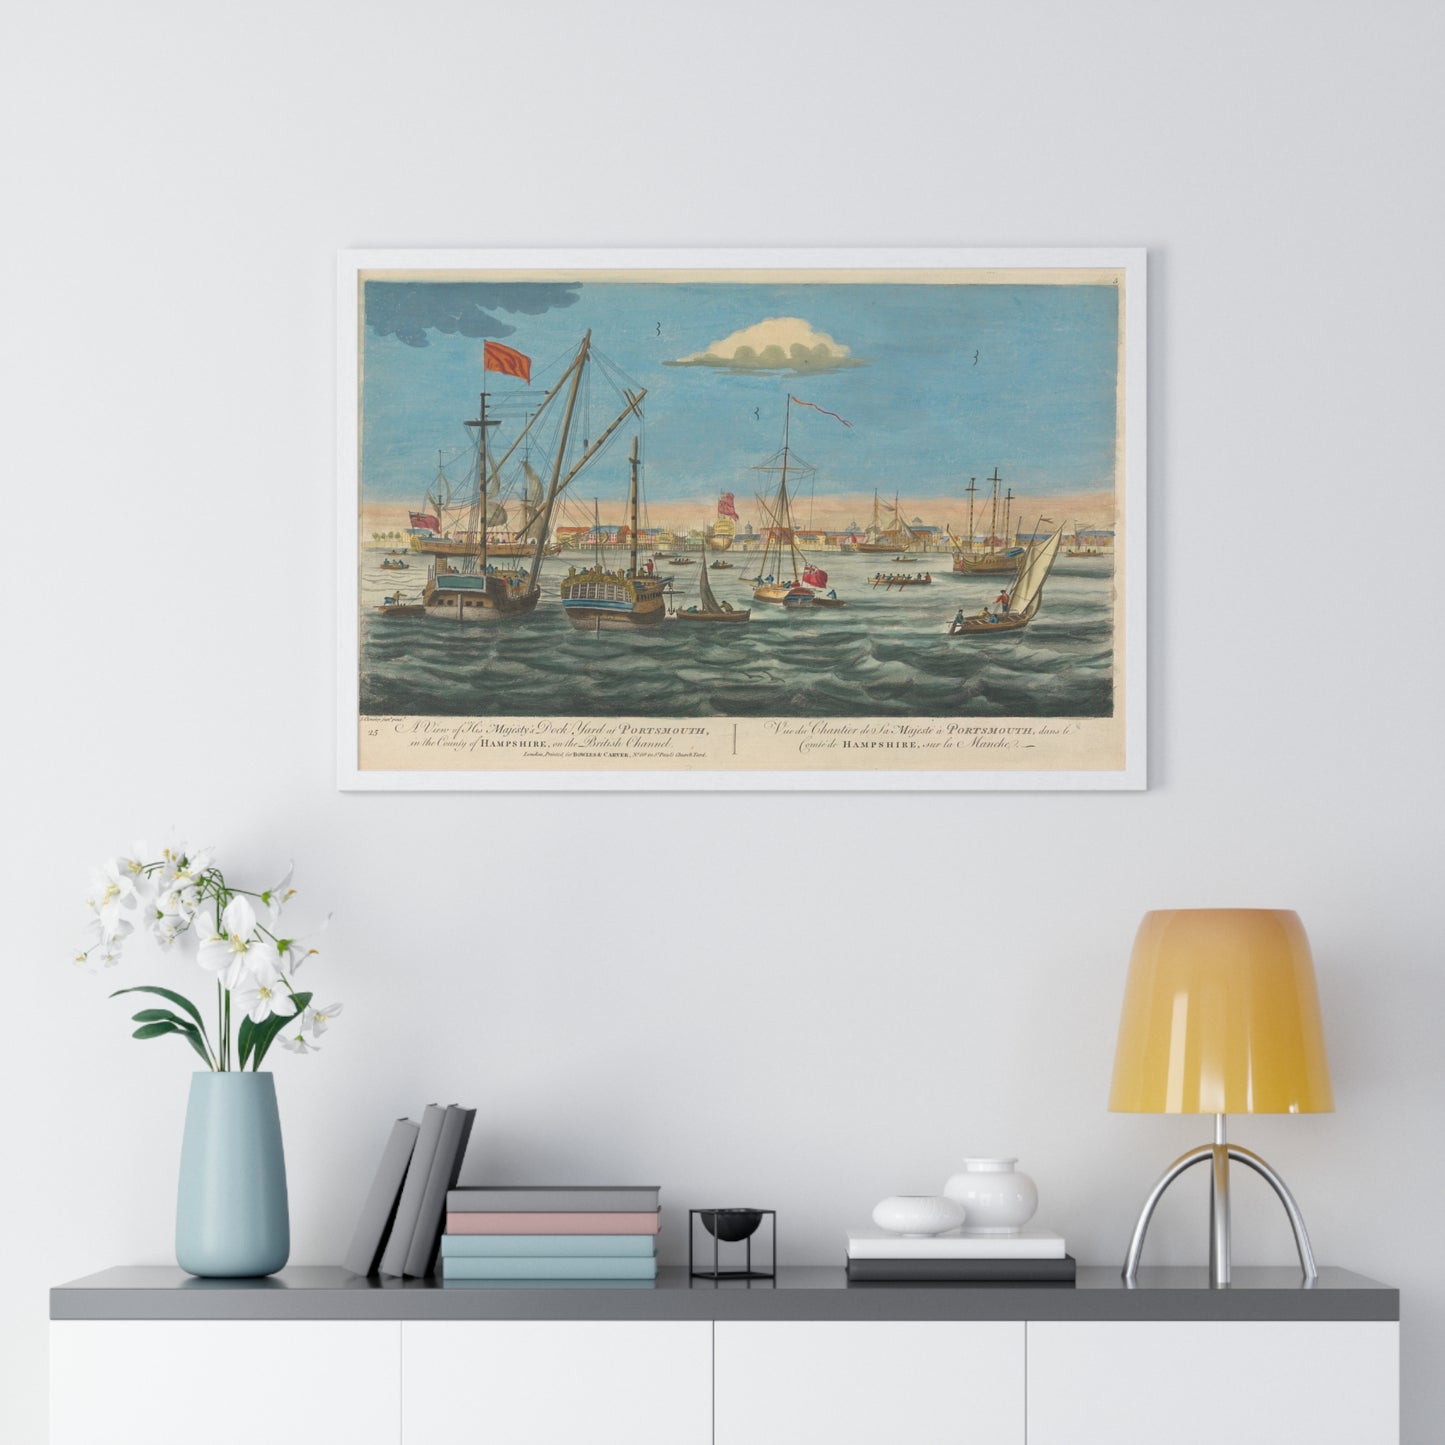 A View of His Majesty's Dock Yard at Portsmouth, in the County of Hampshire, on the British Channel from the Original, Framed Art Print